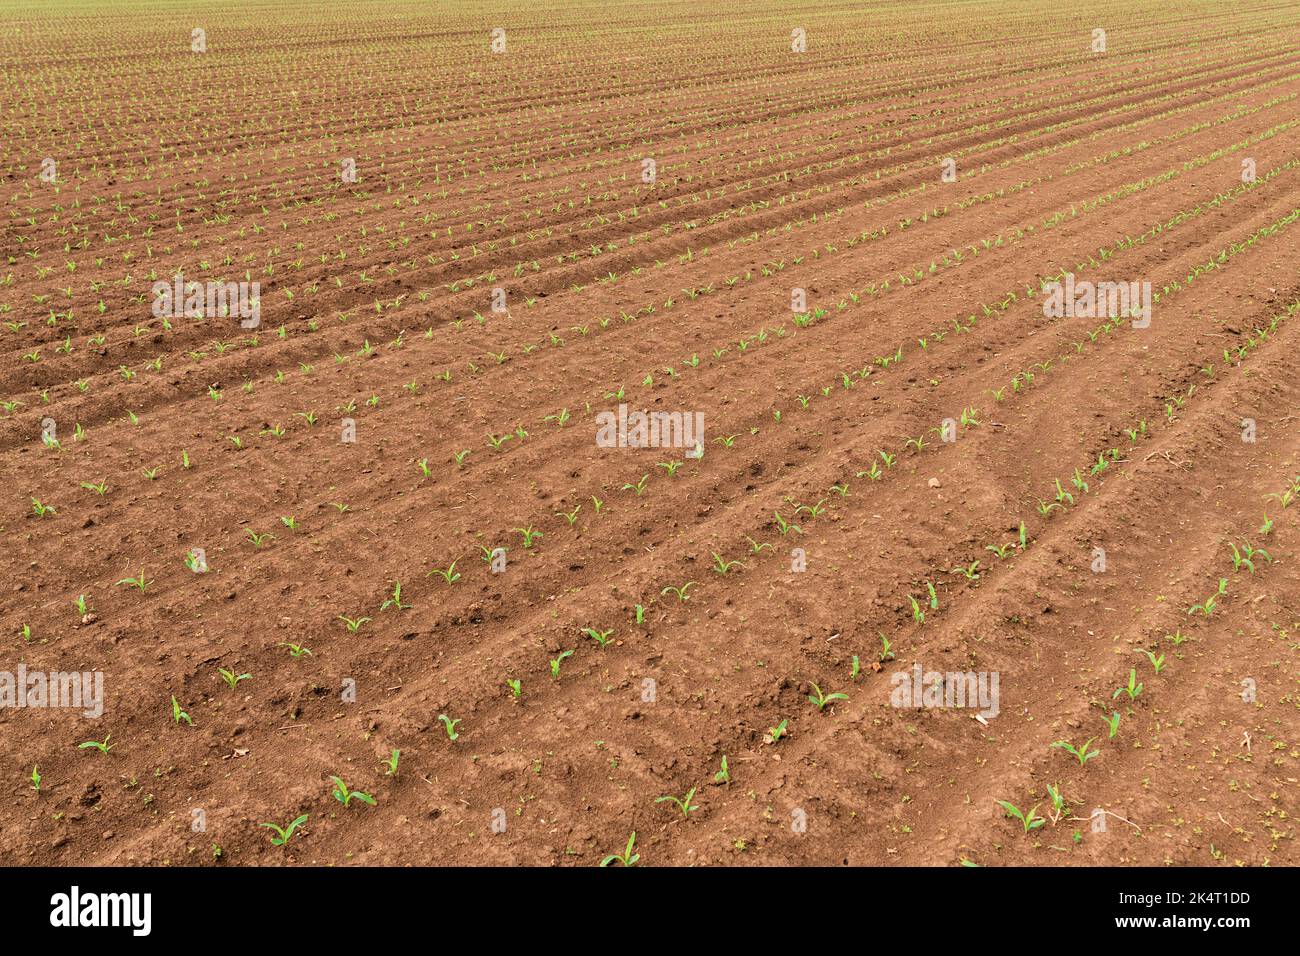 Small corn crop sprout field. Agriculture and farming concept. Selective focus. Stock Photo